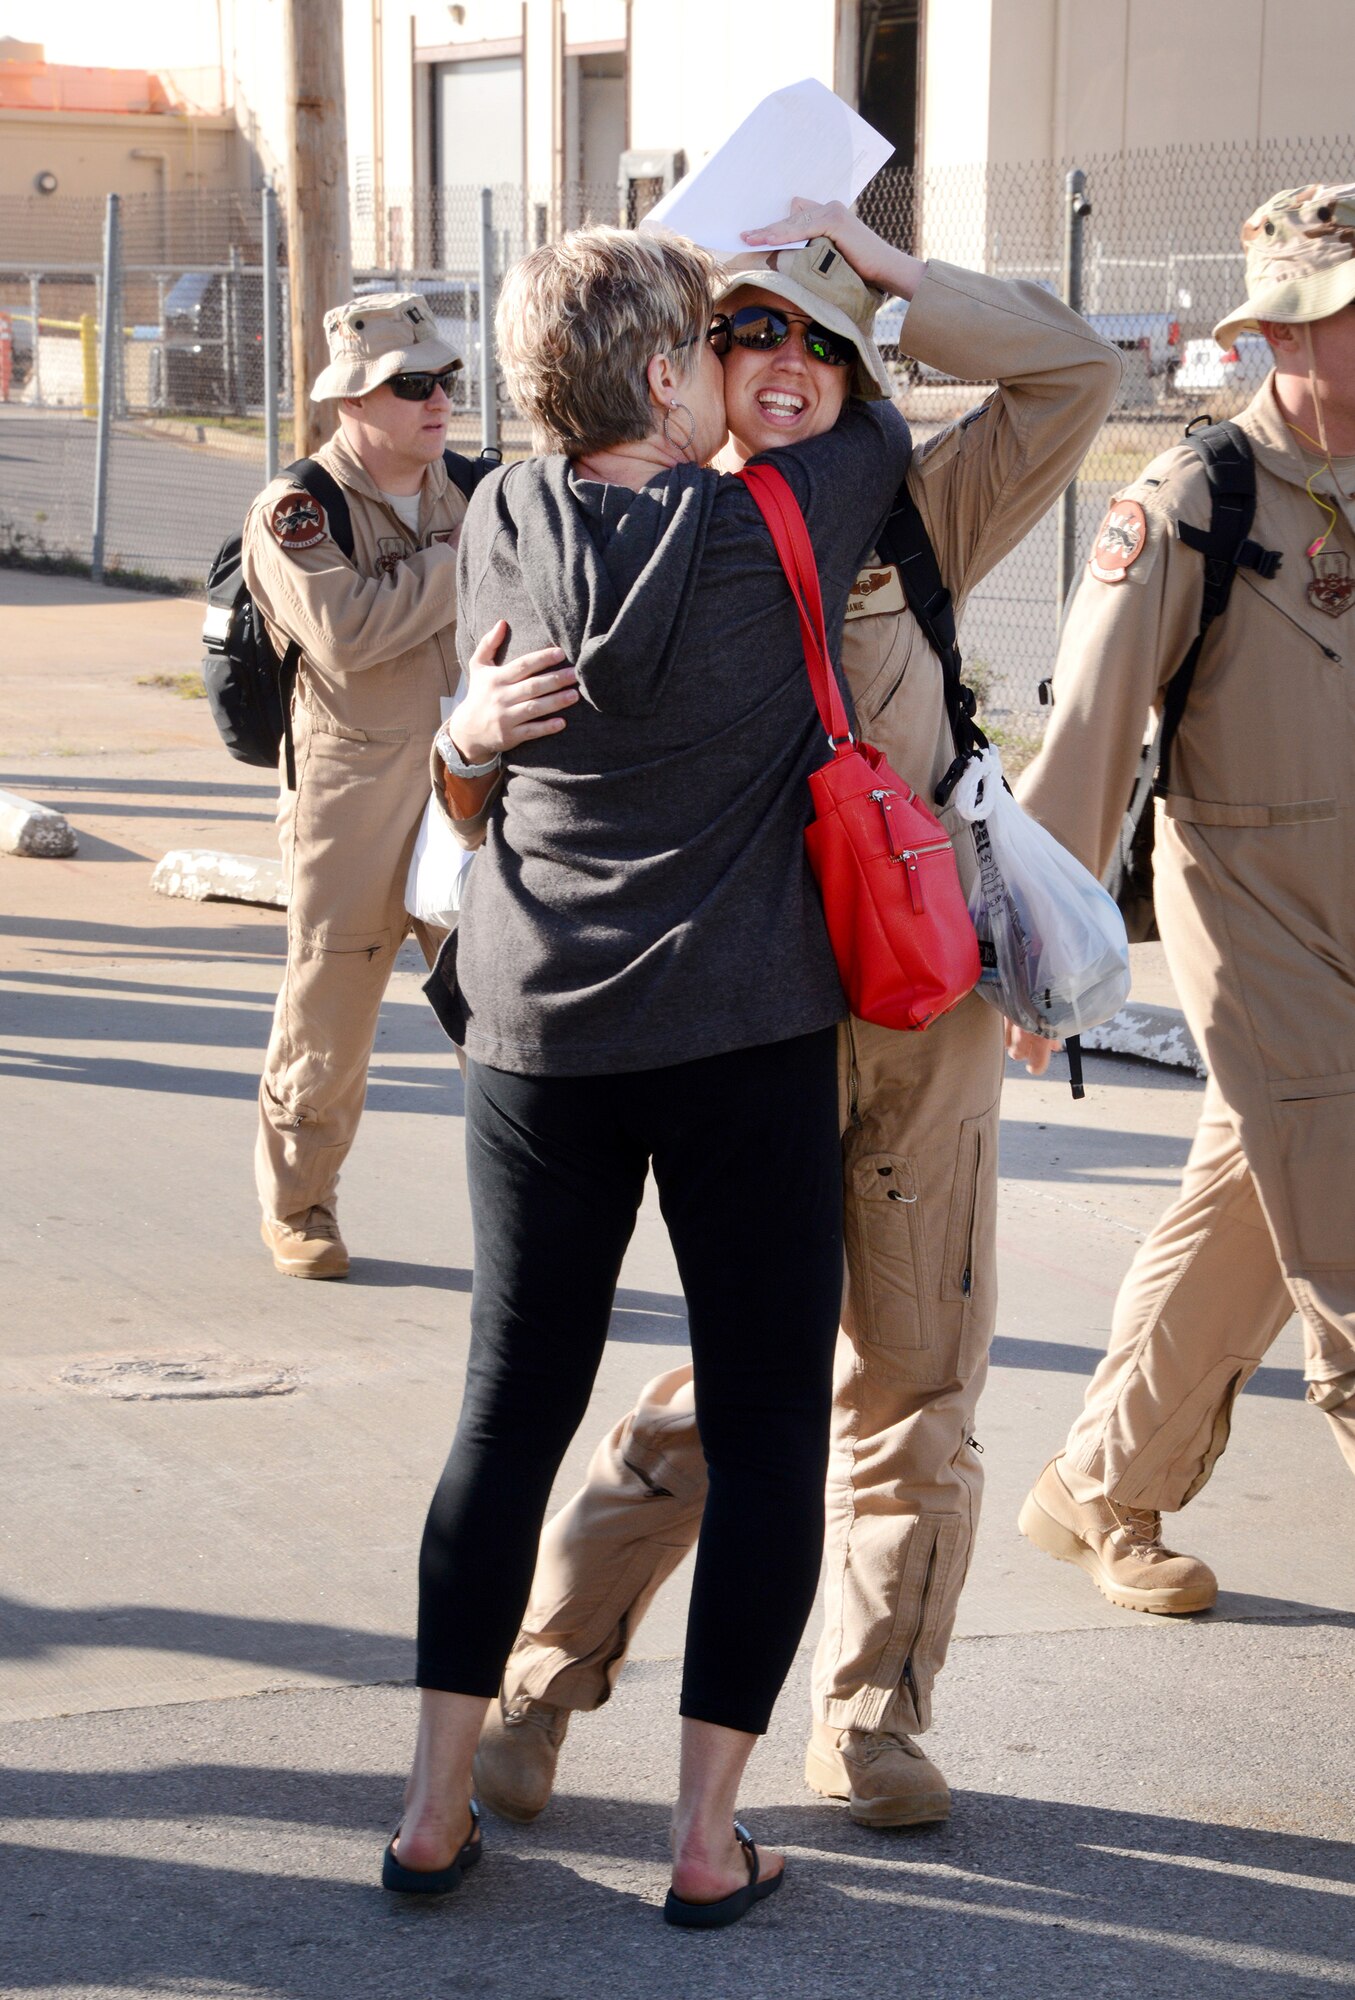 First Lt. Stephanie’s mom, Grace, runs to embrace her daughter after the lieutenant’s arrival from her deployment with her squadron. (Air Force photo by Kelly White)